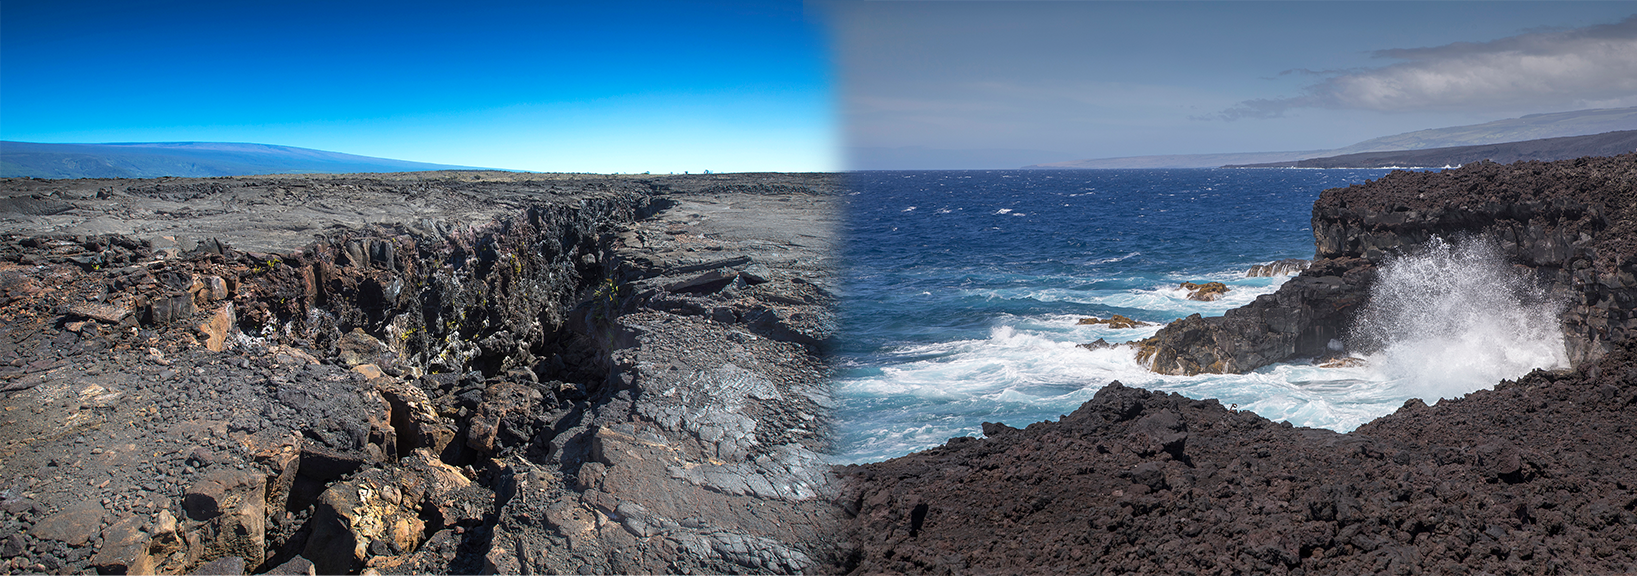 A composite image of a volcanic landscape with a large crack and waves crashing on a sea cliff.